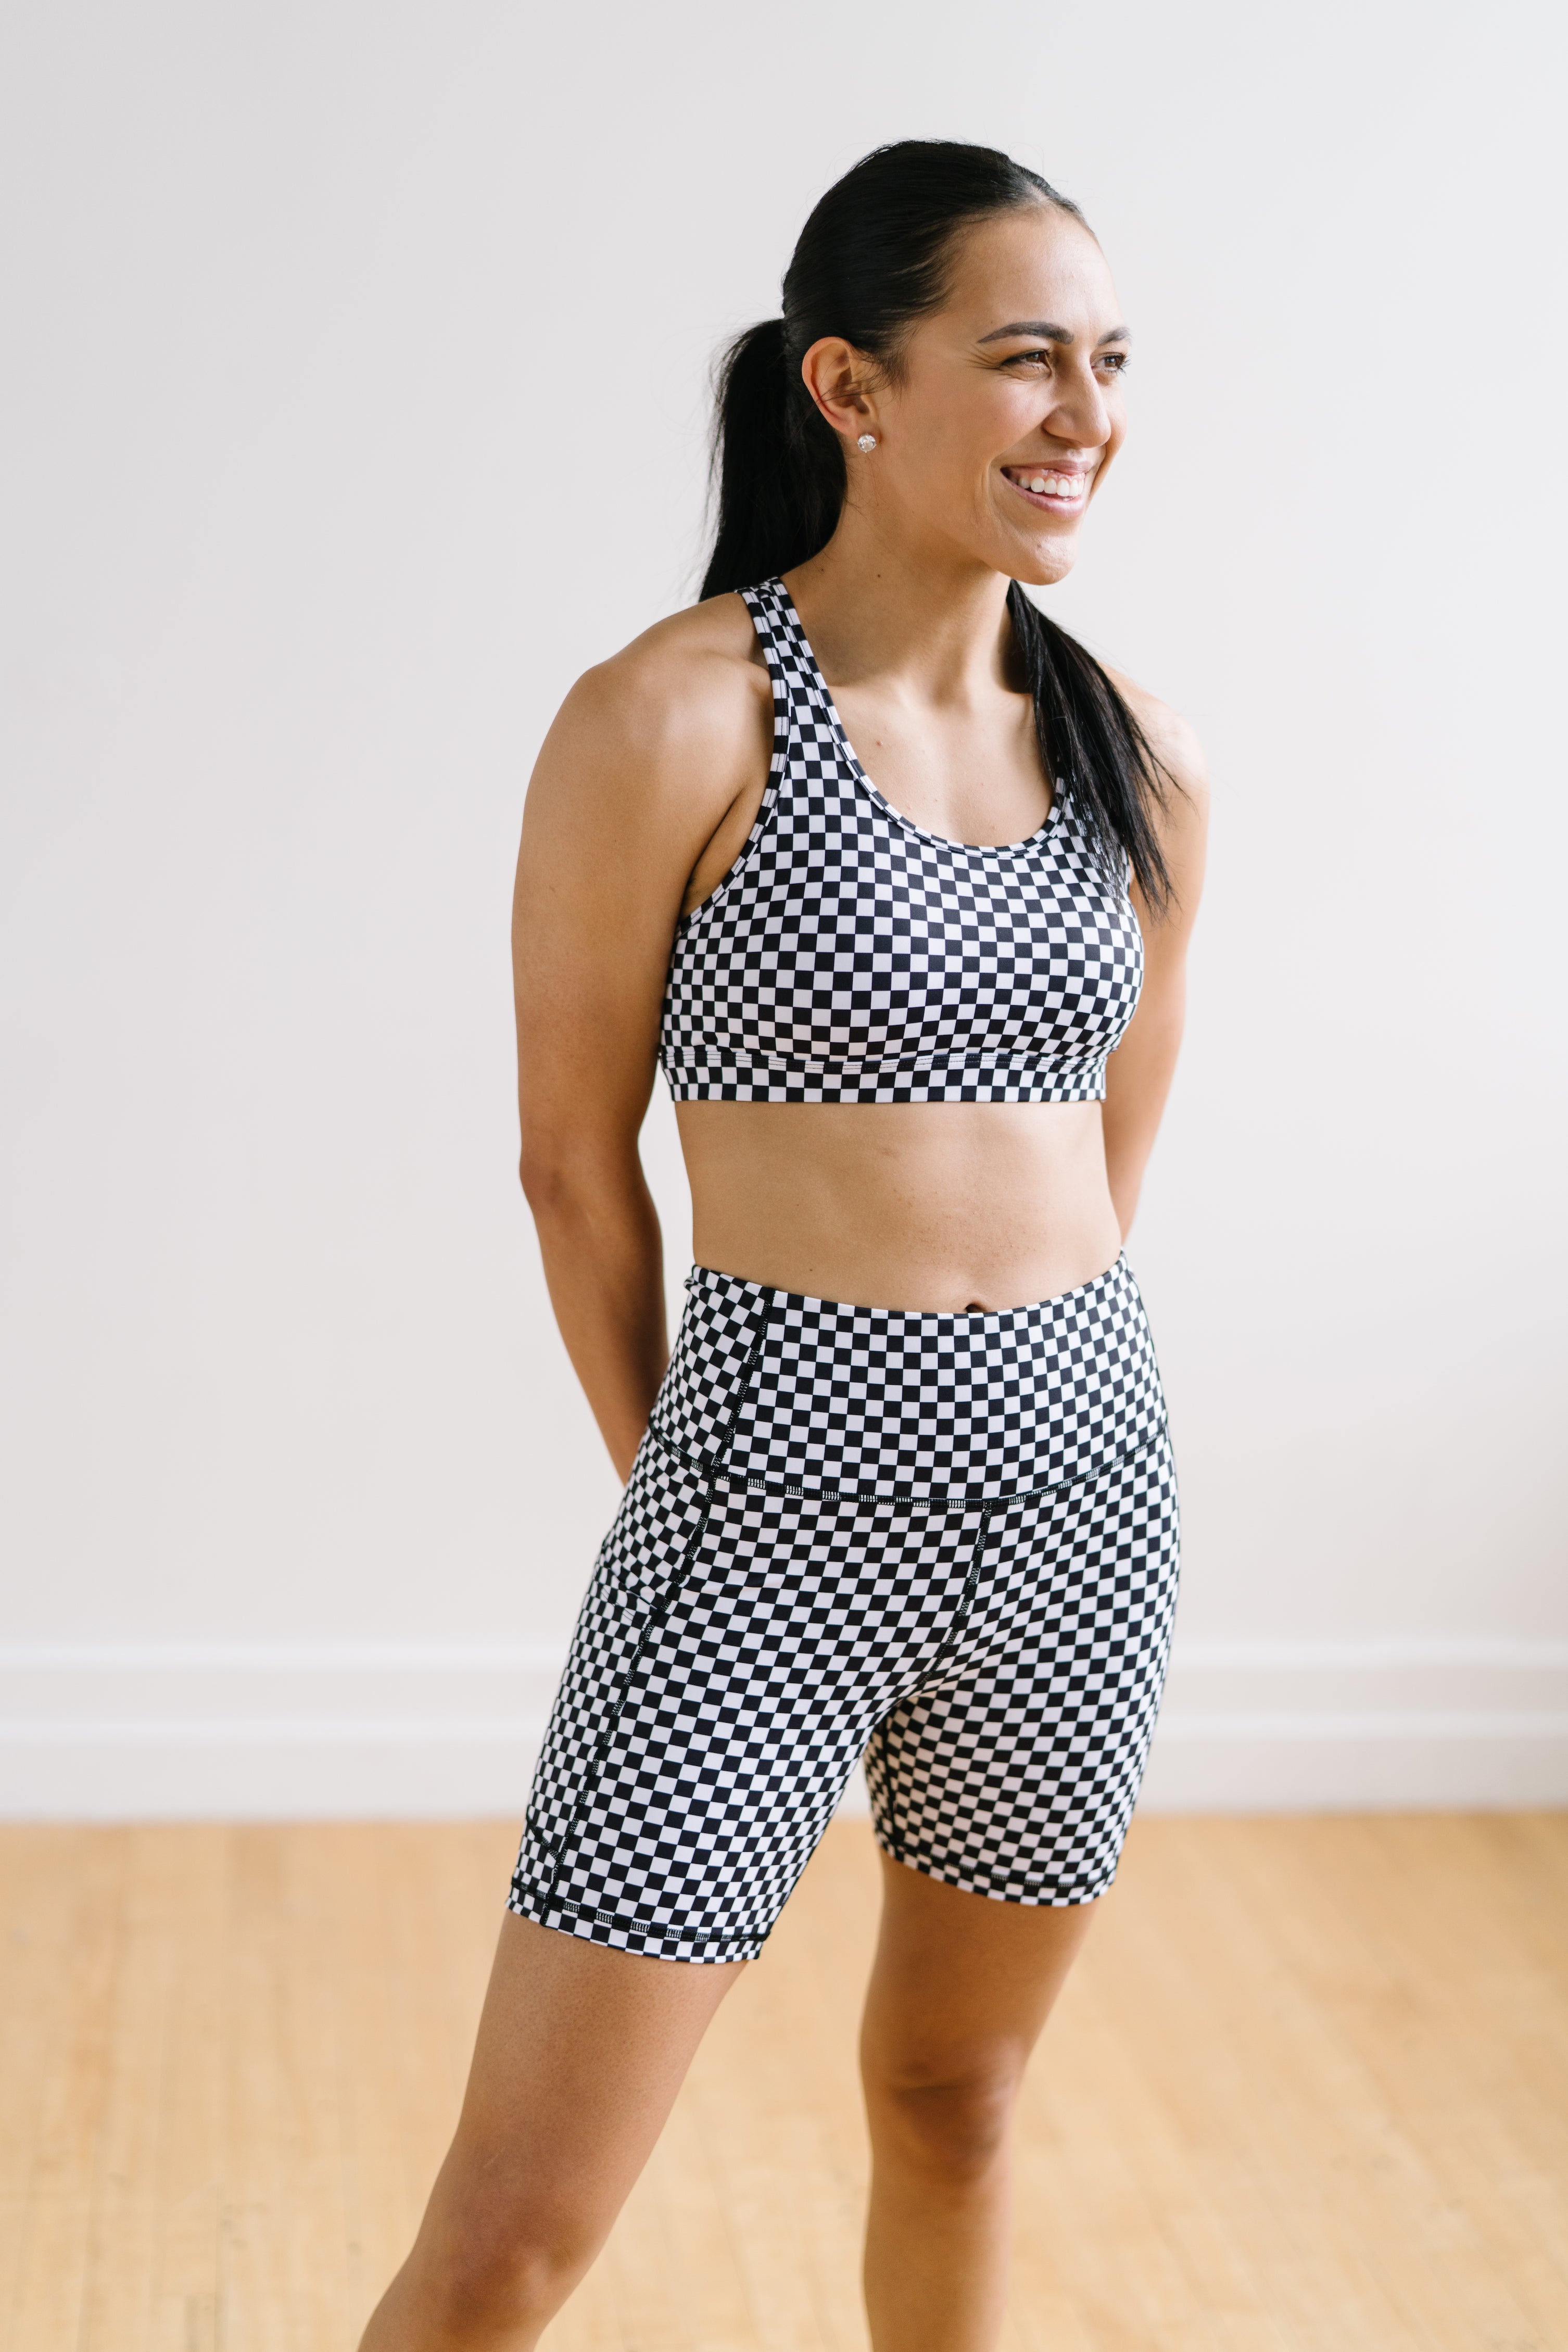 Checkerboard Sports Bra, Racing Sports Bra, Women's Seamless Bra, Checkered  Top, Checkerboard Clothing, Black and White Top, Grunge Clothing -   Canada